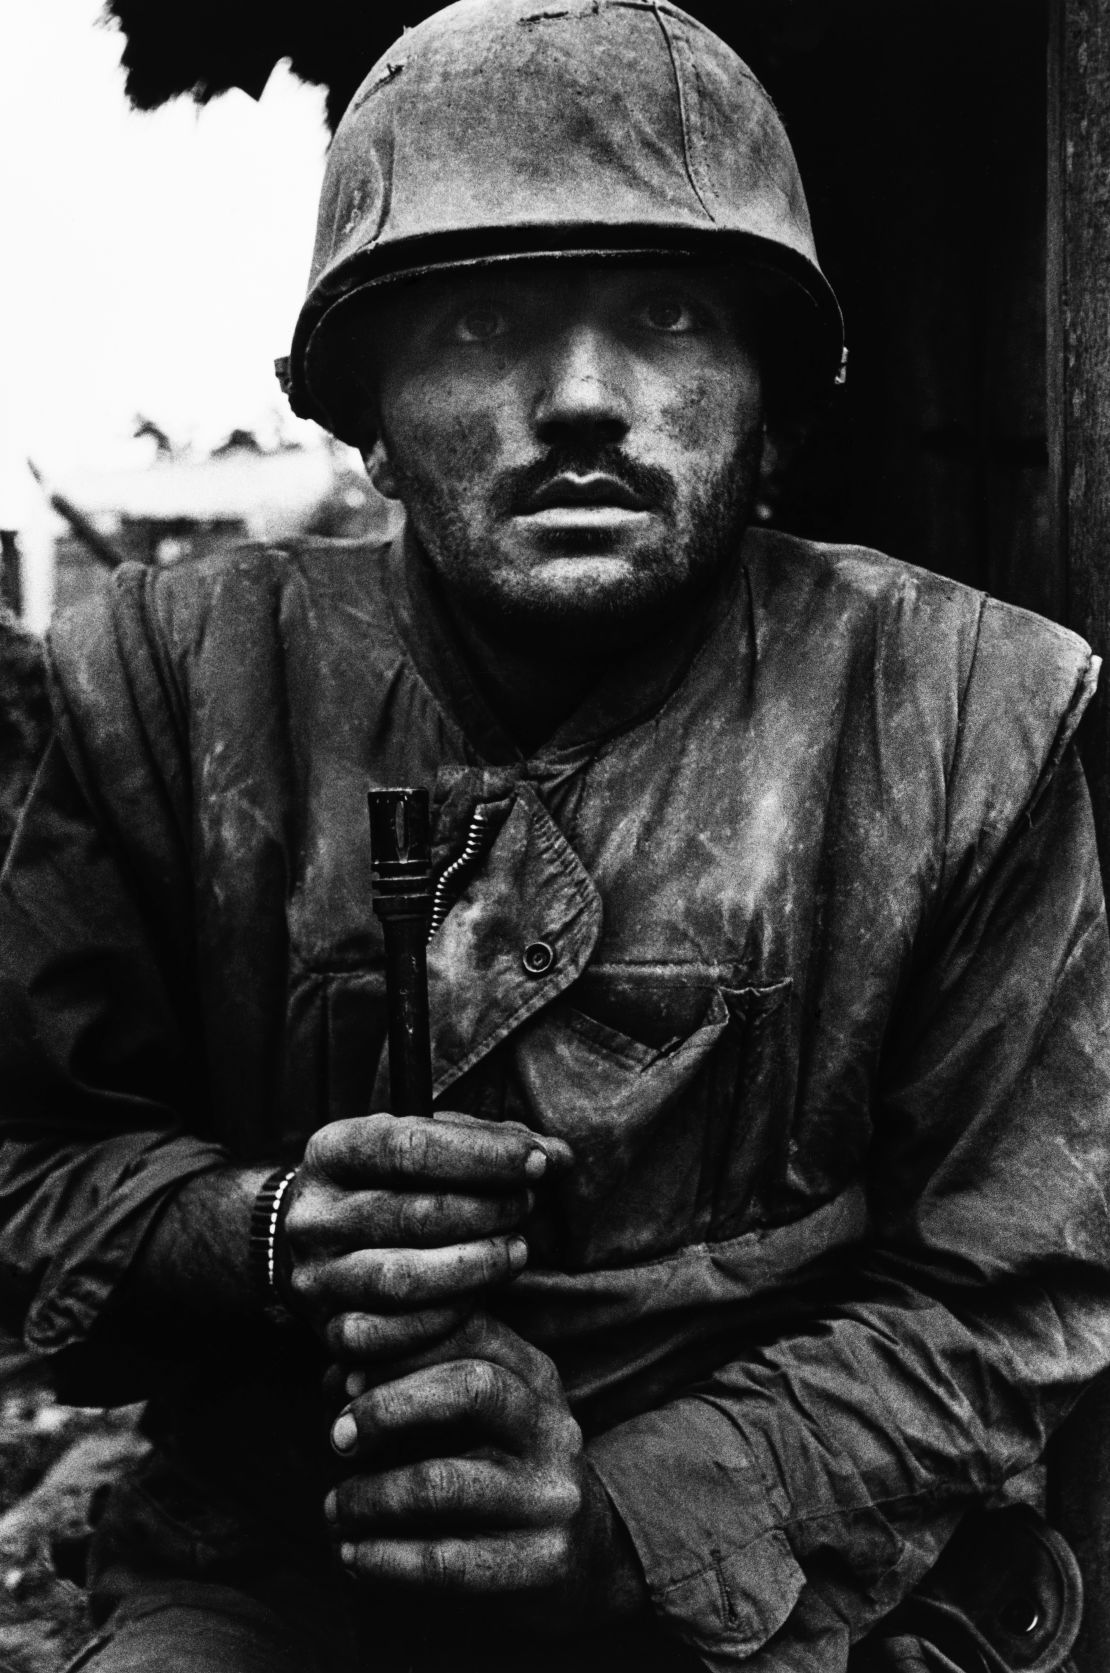 A U.S. Marine suffering from severe shell shock waits to be evacuated to safety during the Battle for Hue, Vietnam, 1968.